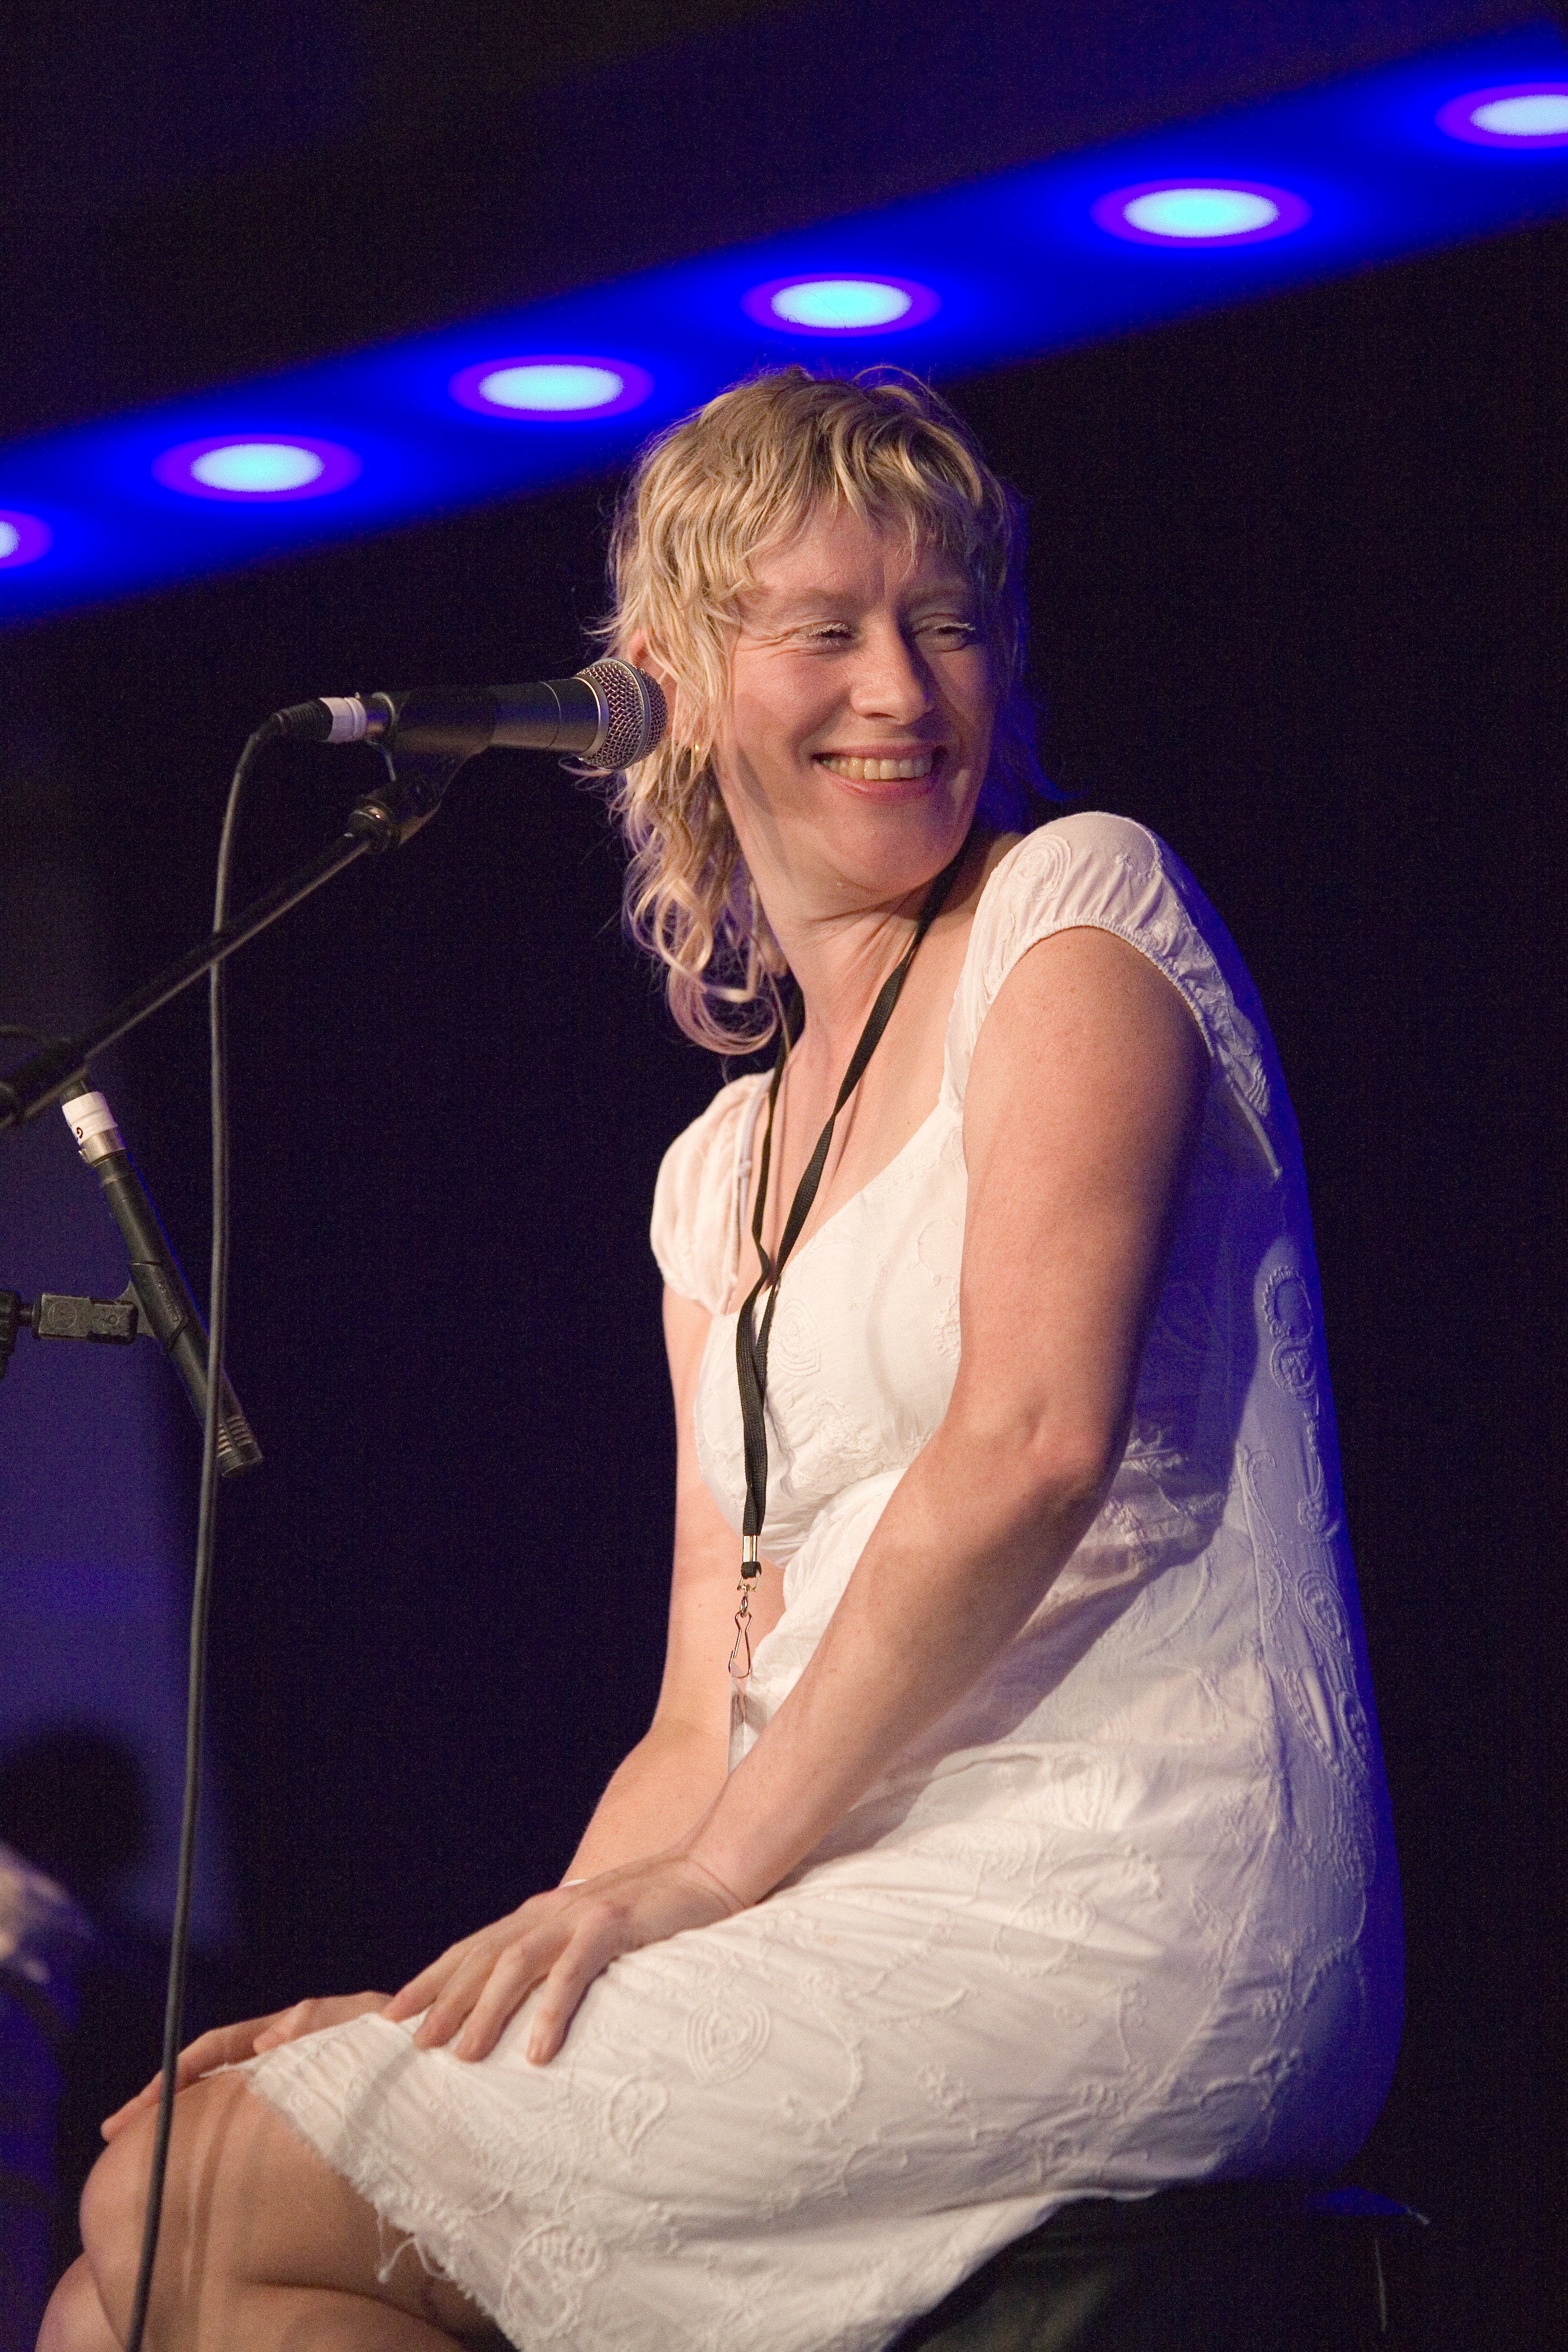 Sally Timms performing live at All Tomorrows Parties at Butlins Holiday Centre in Minehead. 28th April 2007. | Source: Getty Images